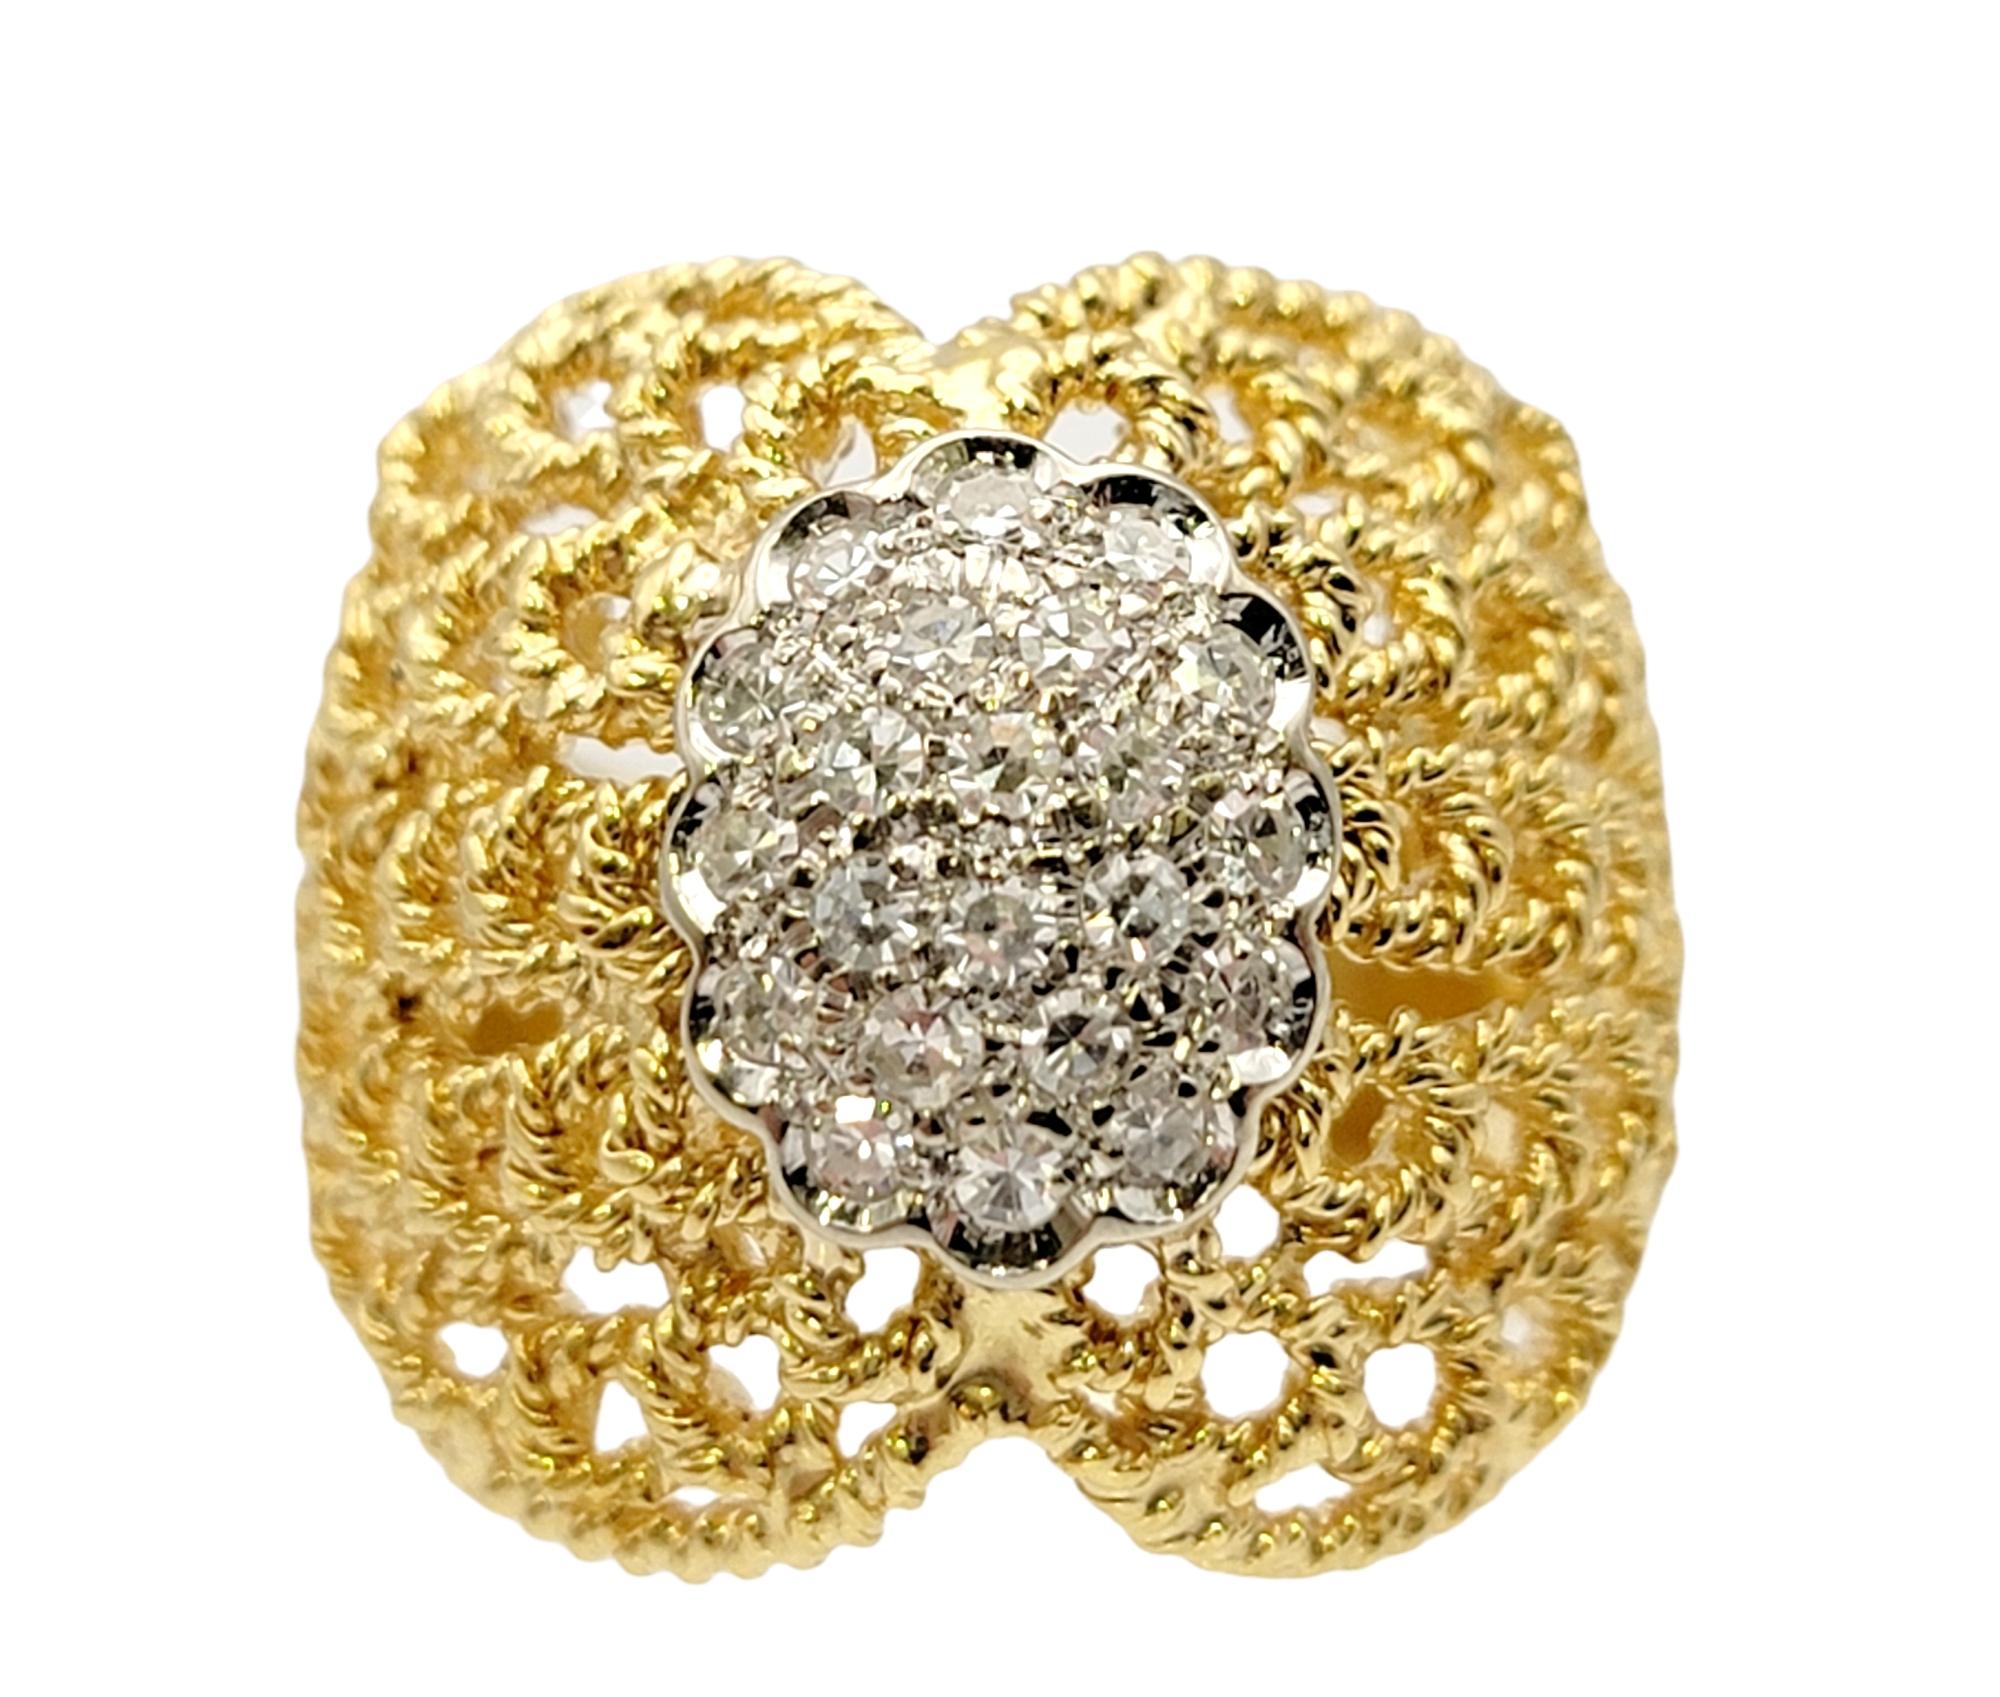 Ring size: 5.25

Absolutely gorgeous diamond clustered ring with intricate 18 karat yellow gold mesh design. The wide, webbed pattern fills the finger while still remaining delicate, while the elegant tightly clustered design makes the natural